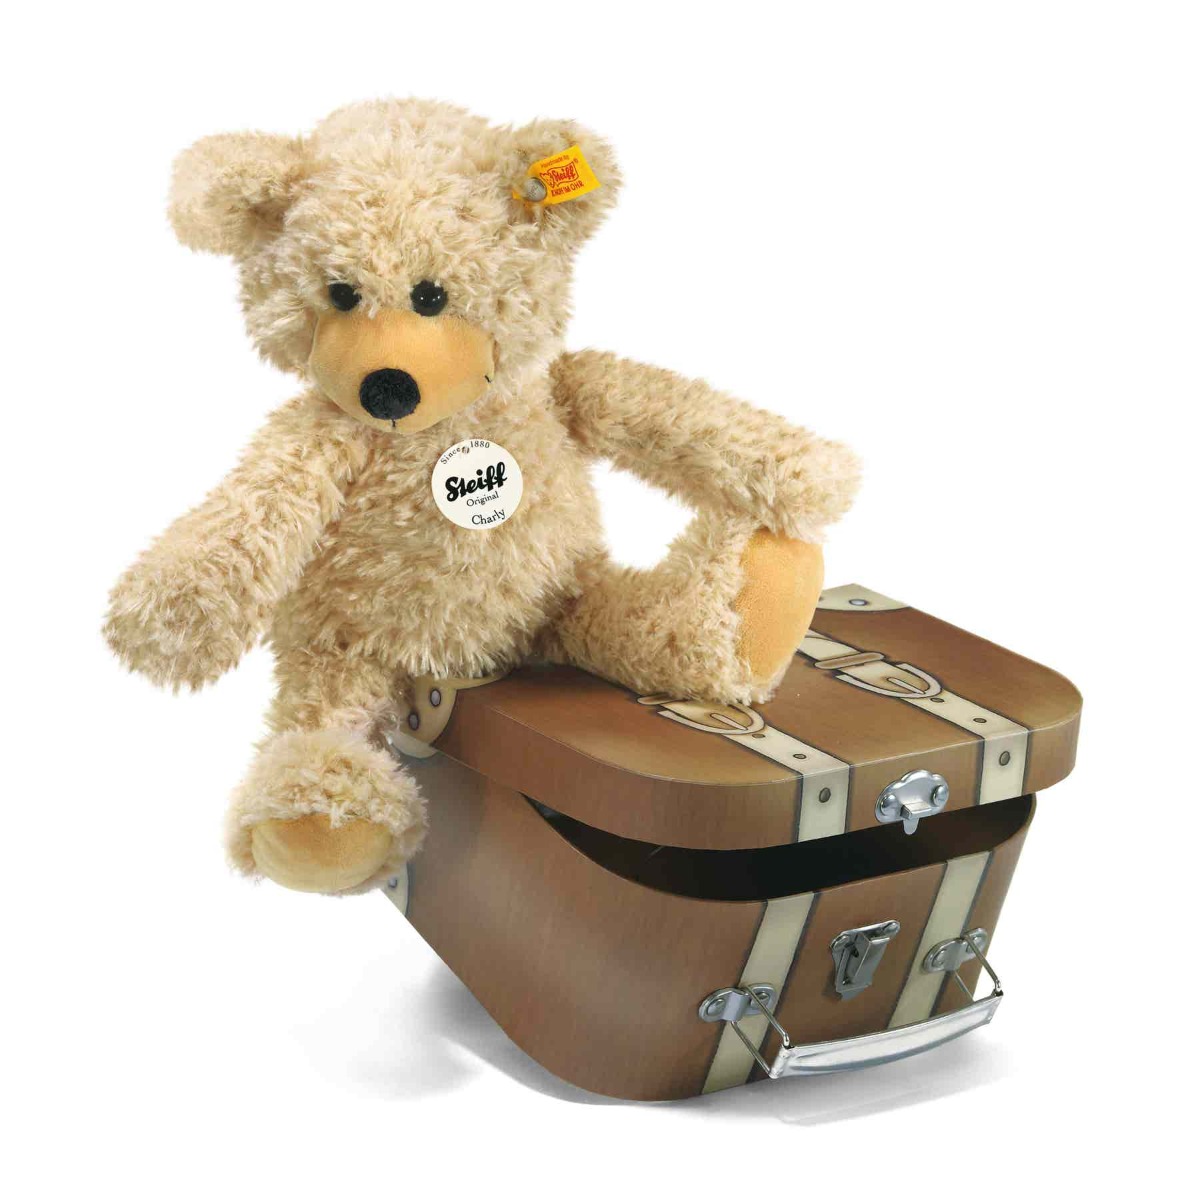 Мягкая игрушка Steiff Charly Dangling Teddy Bear in Suitcase бежевый suitcase high quality caster parts repair luggage case rolling casters replacement luggage trolley case parts new silent wheels